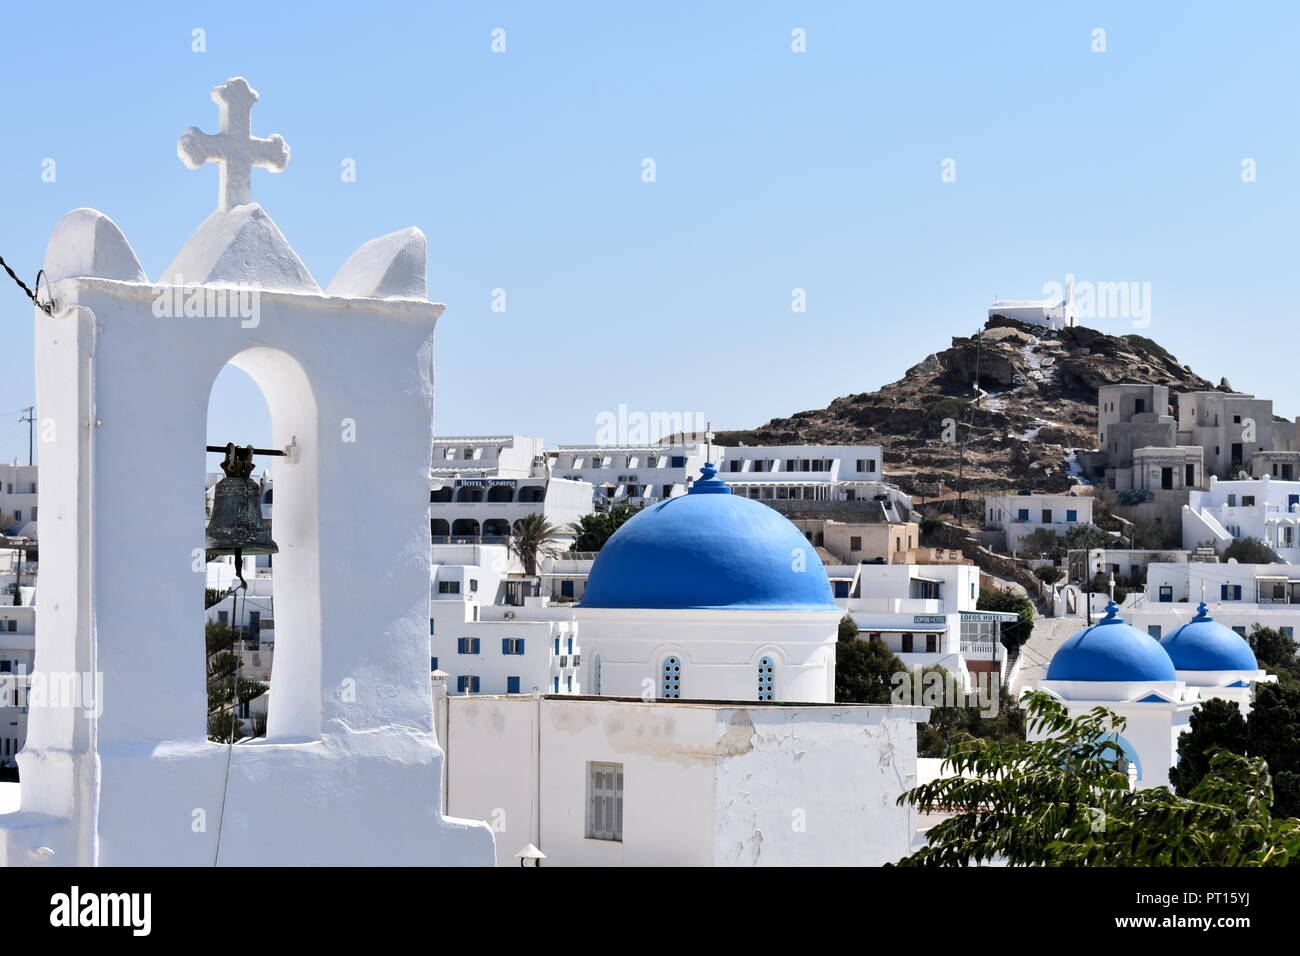 Row of churches in the old village at the beautiful Greek island of Ios. Brightly painted blue domes and a traditional white painted bell tower. Stock Photo